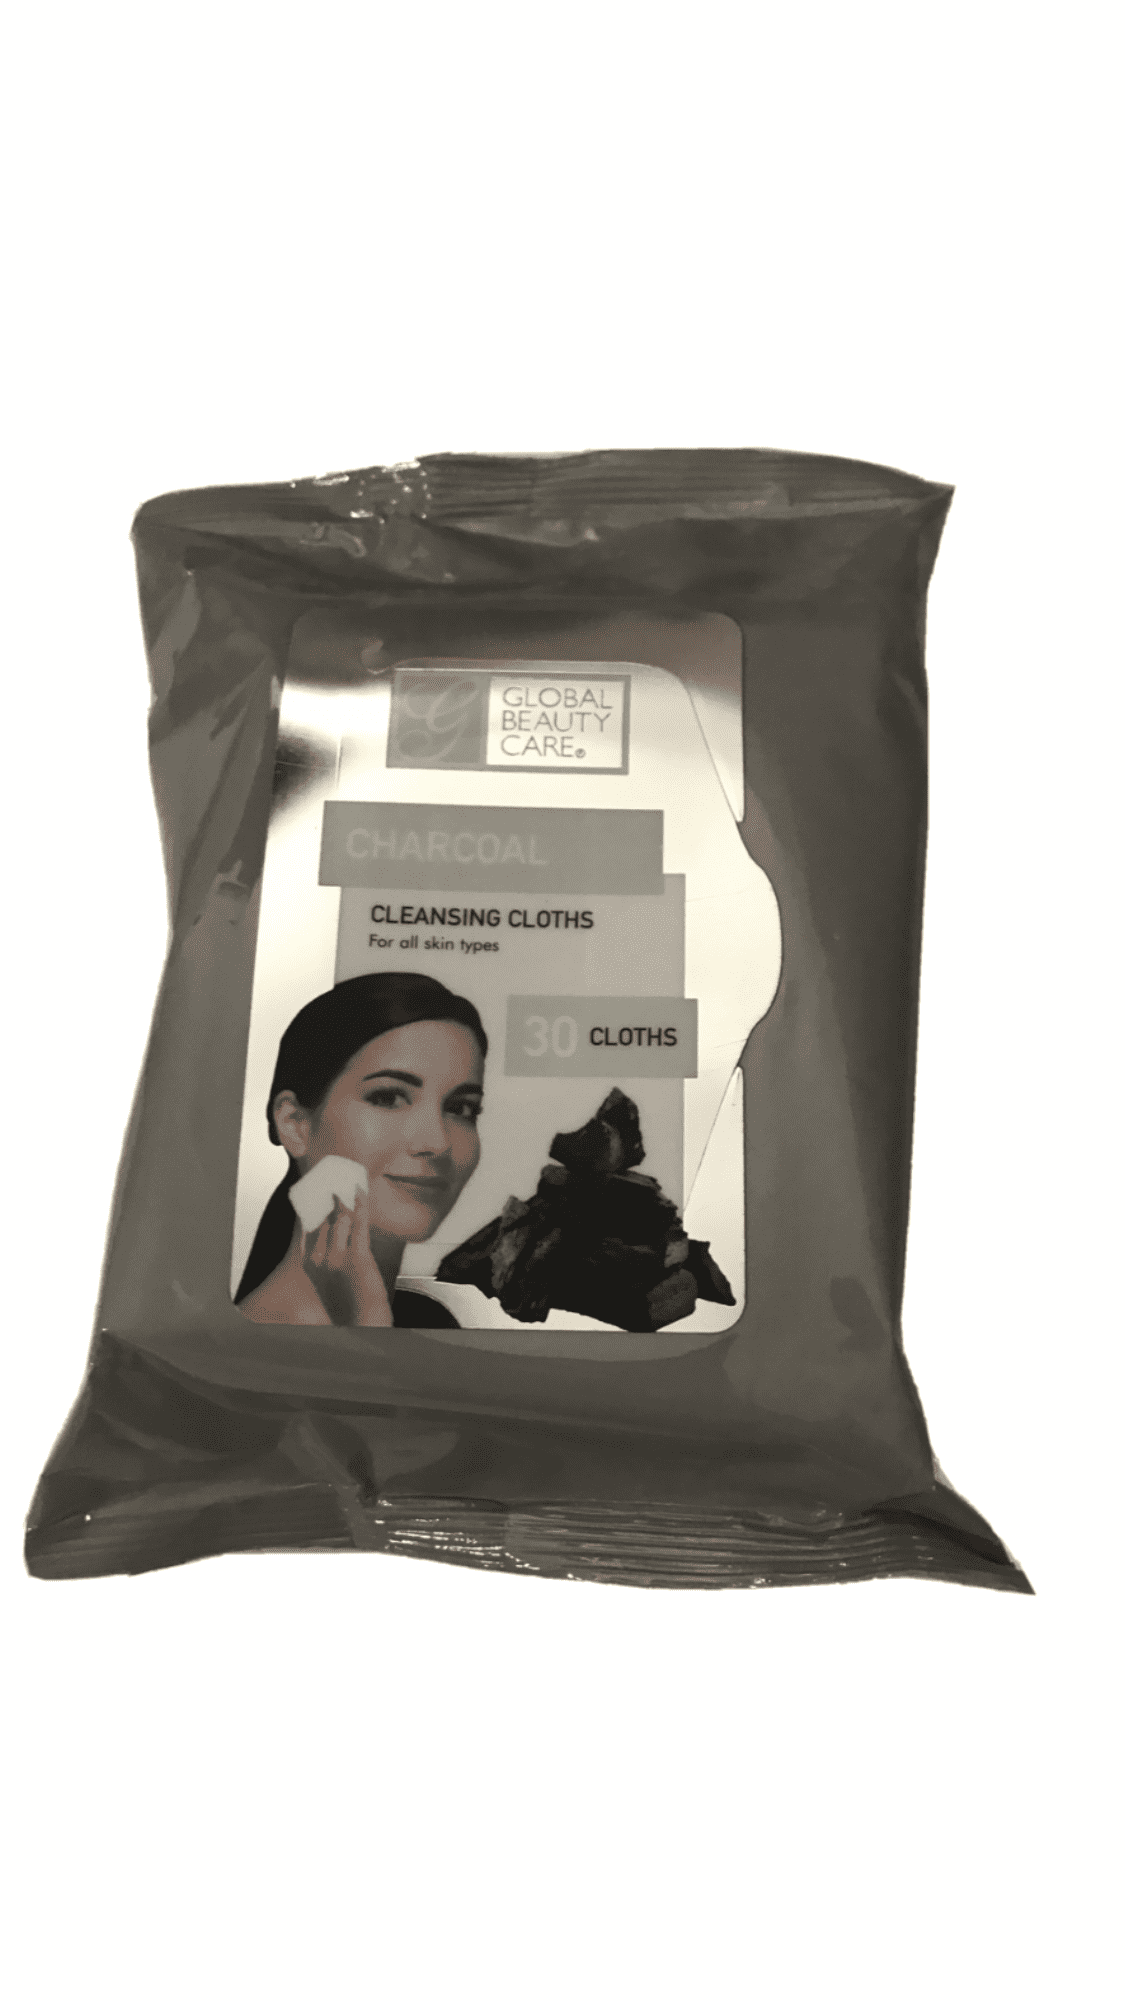 2 Global Beauty Care Charcoal Cleansing Cloths Hypoallergenic For All Skin Types 30 Cloths Each Walmart Com